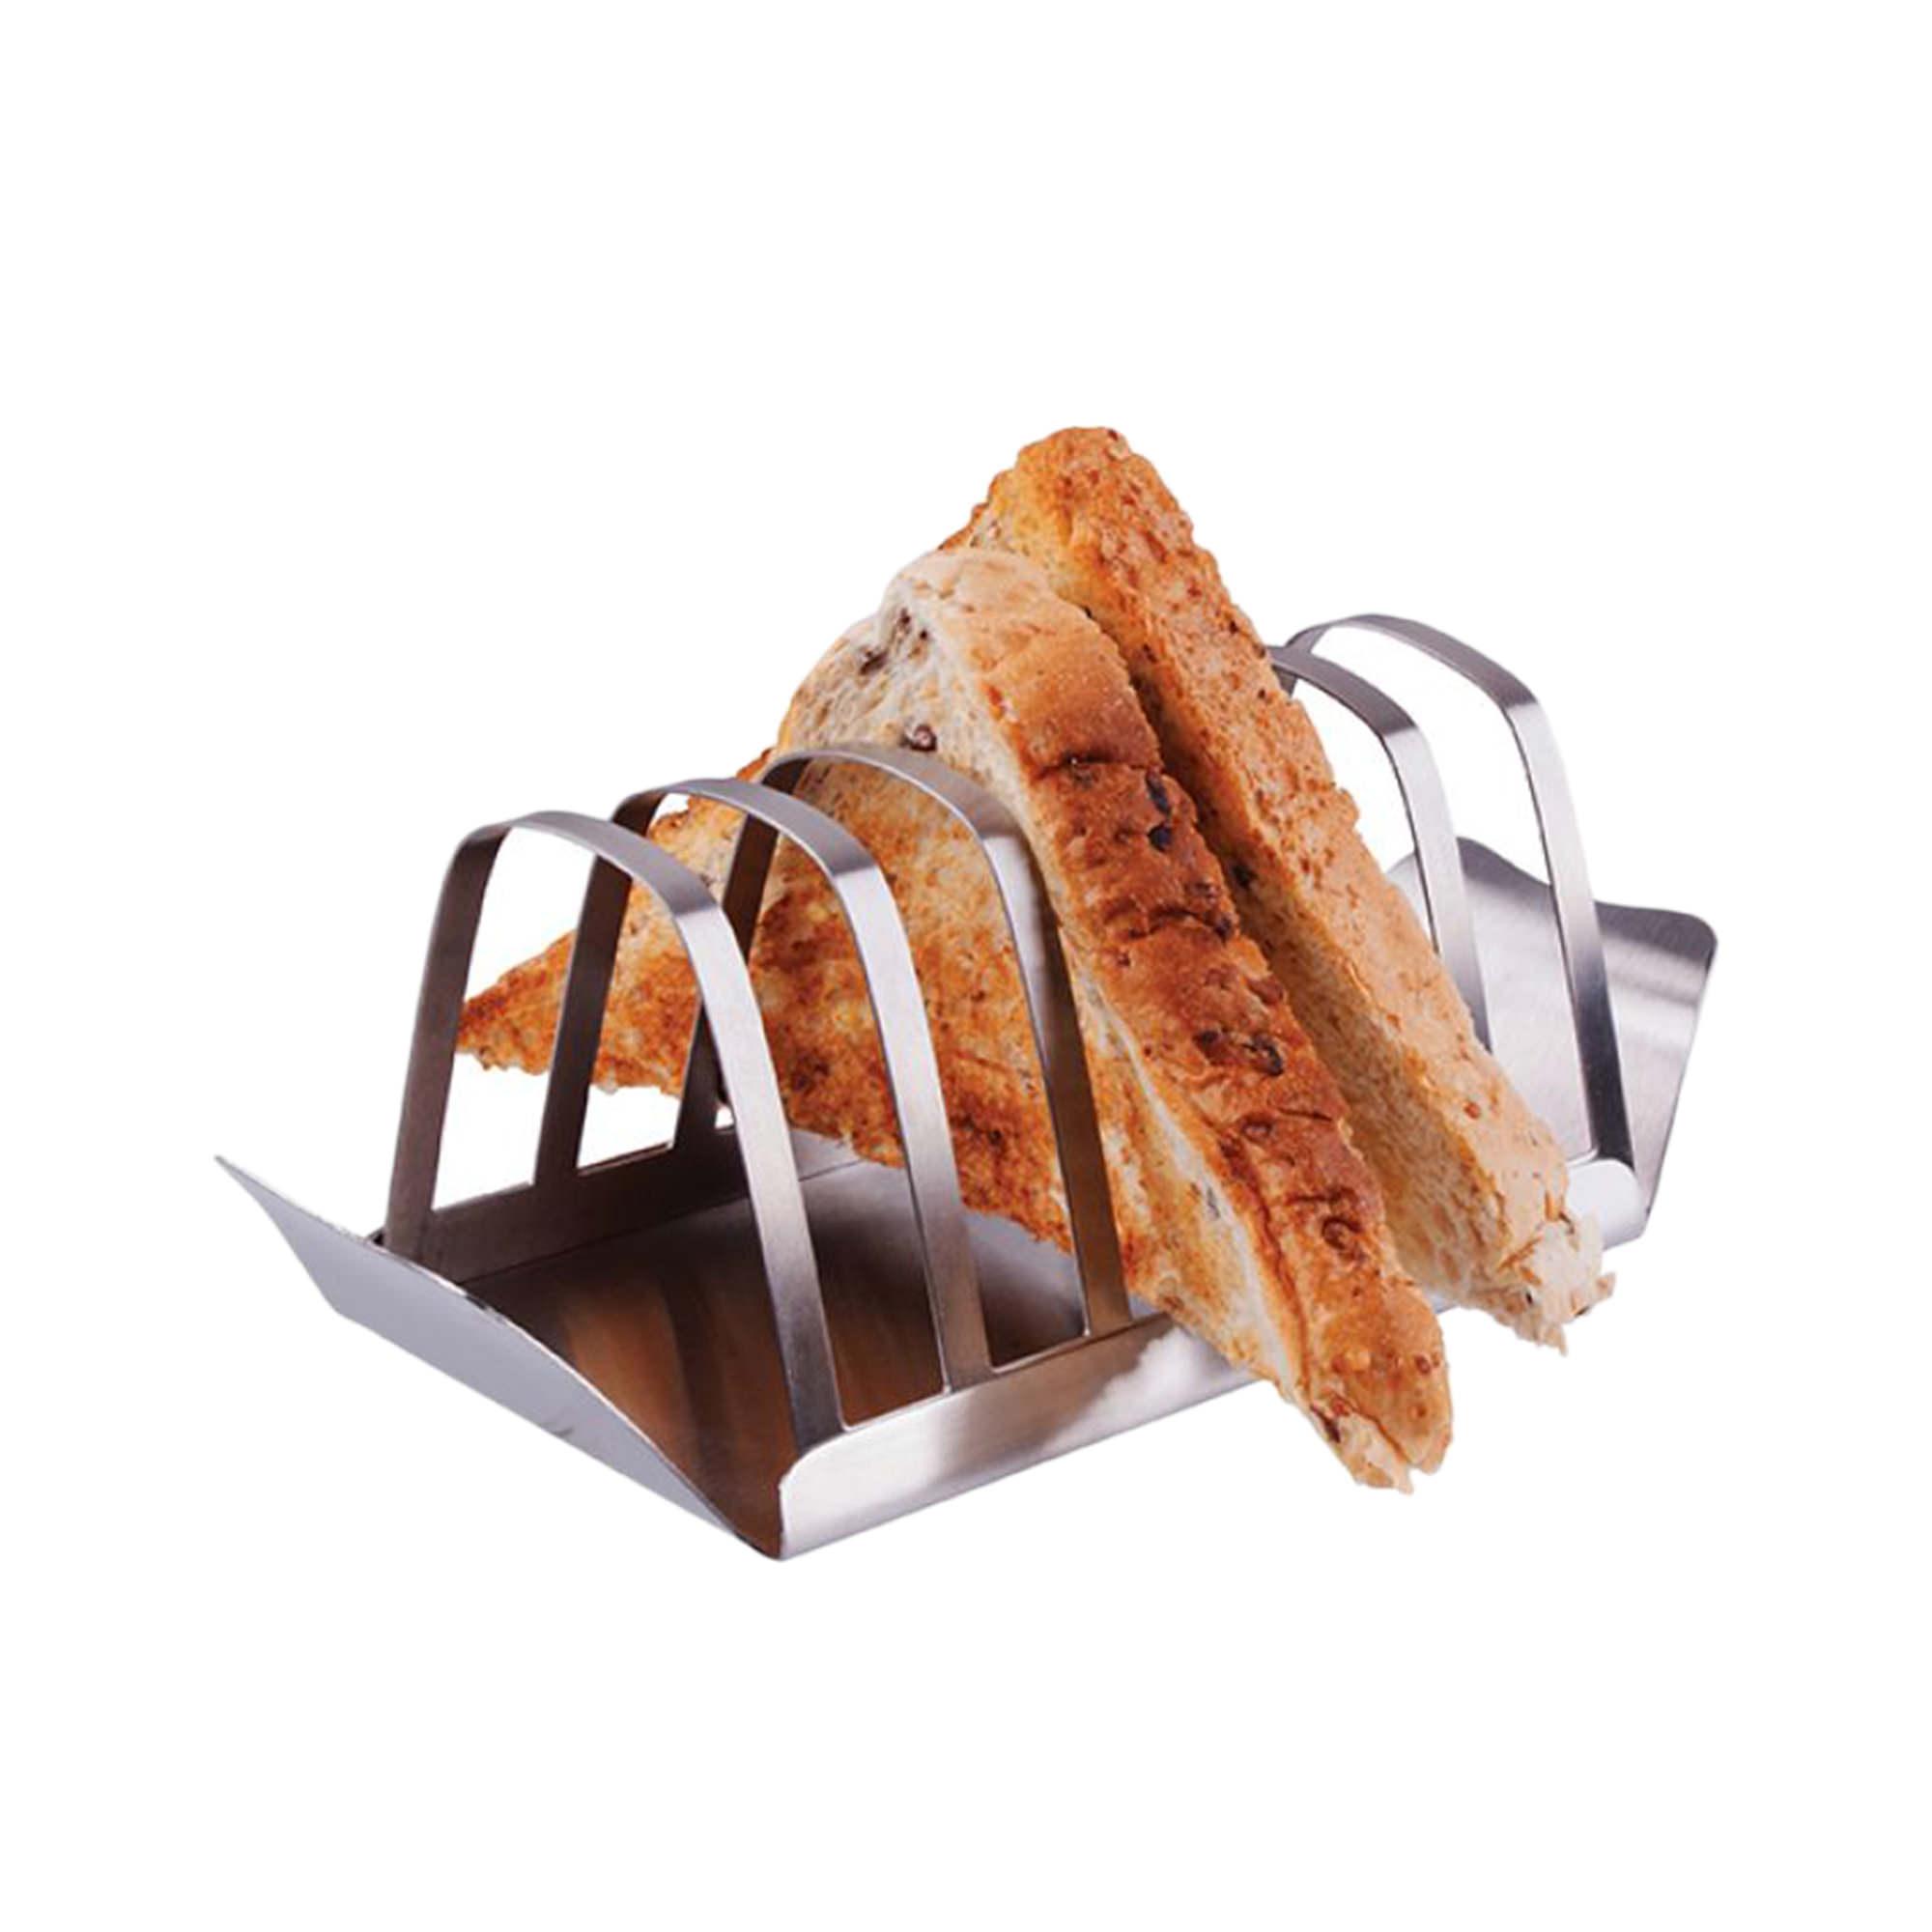 Appetito Stainless Steel Toast Rack with Tray Image 4